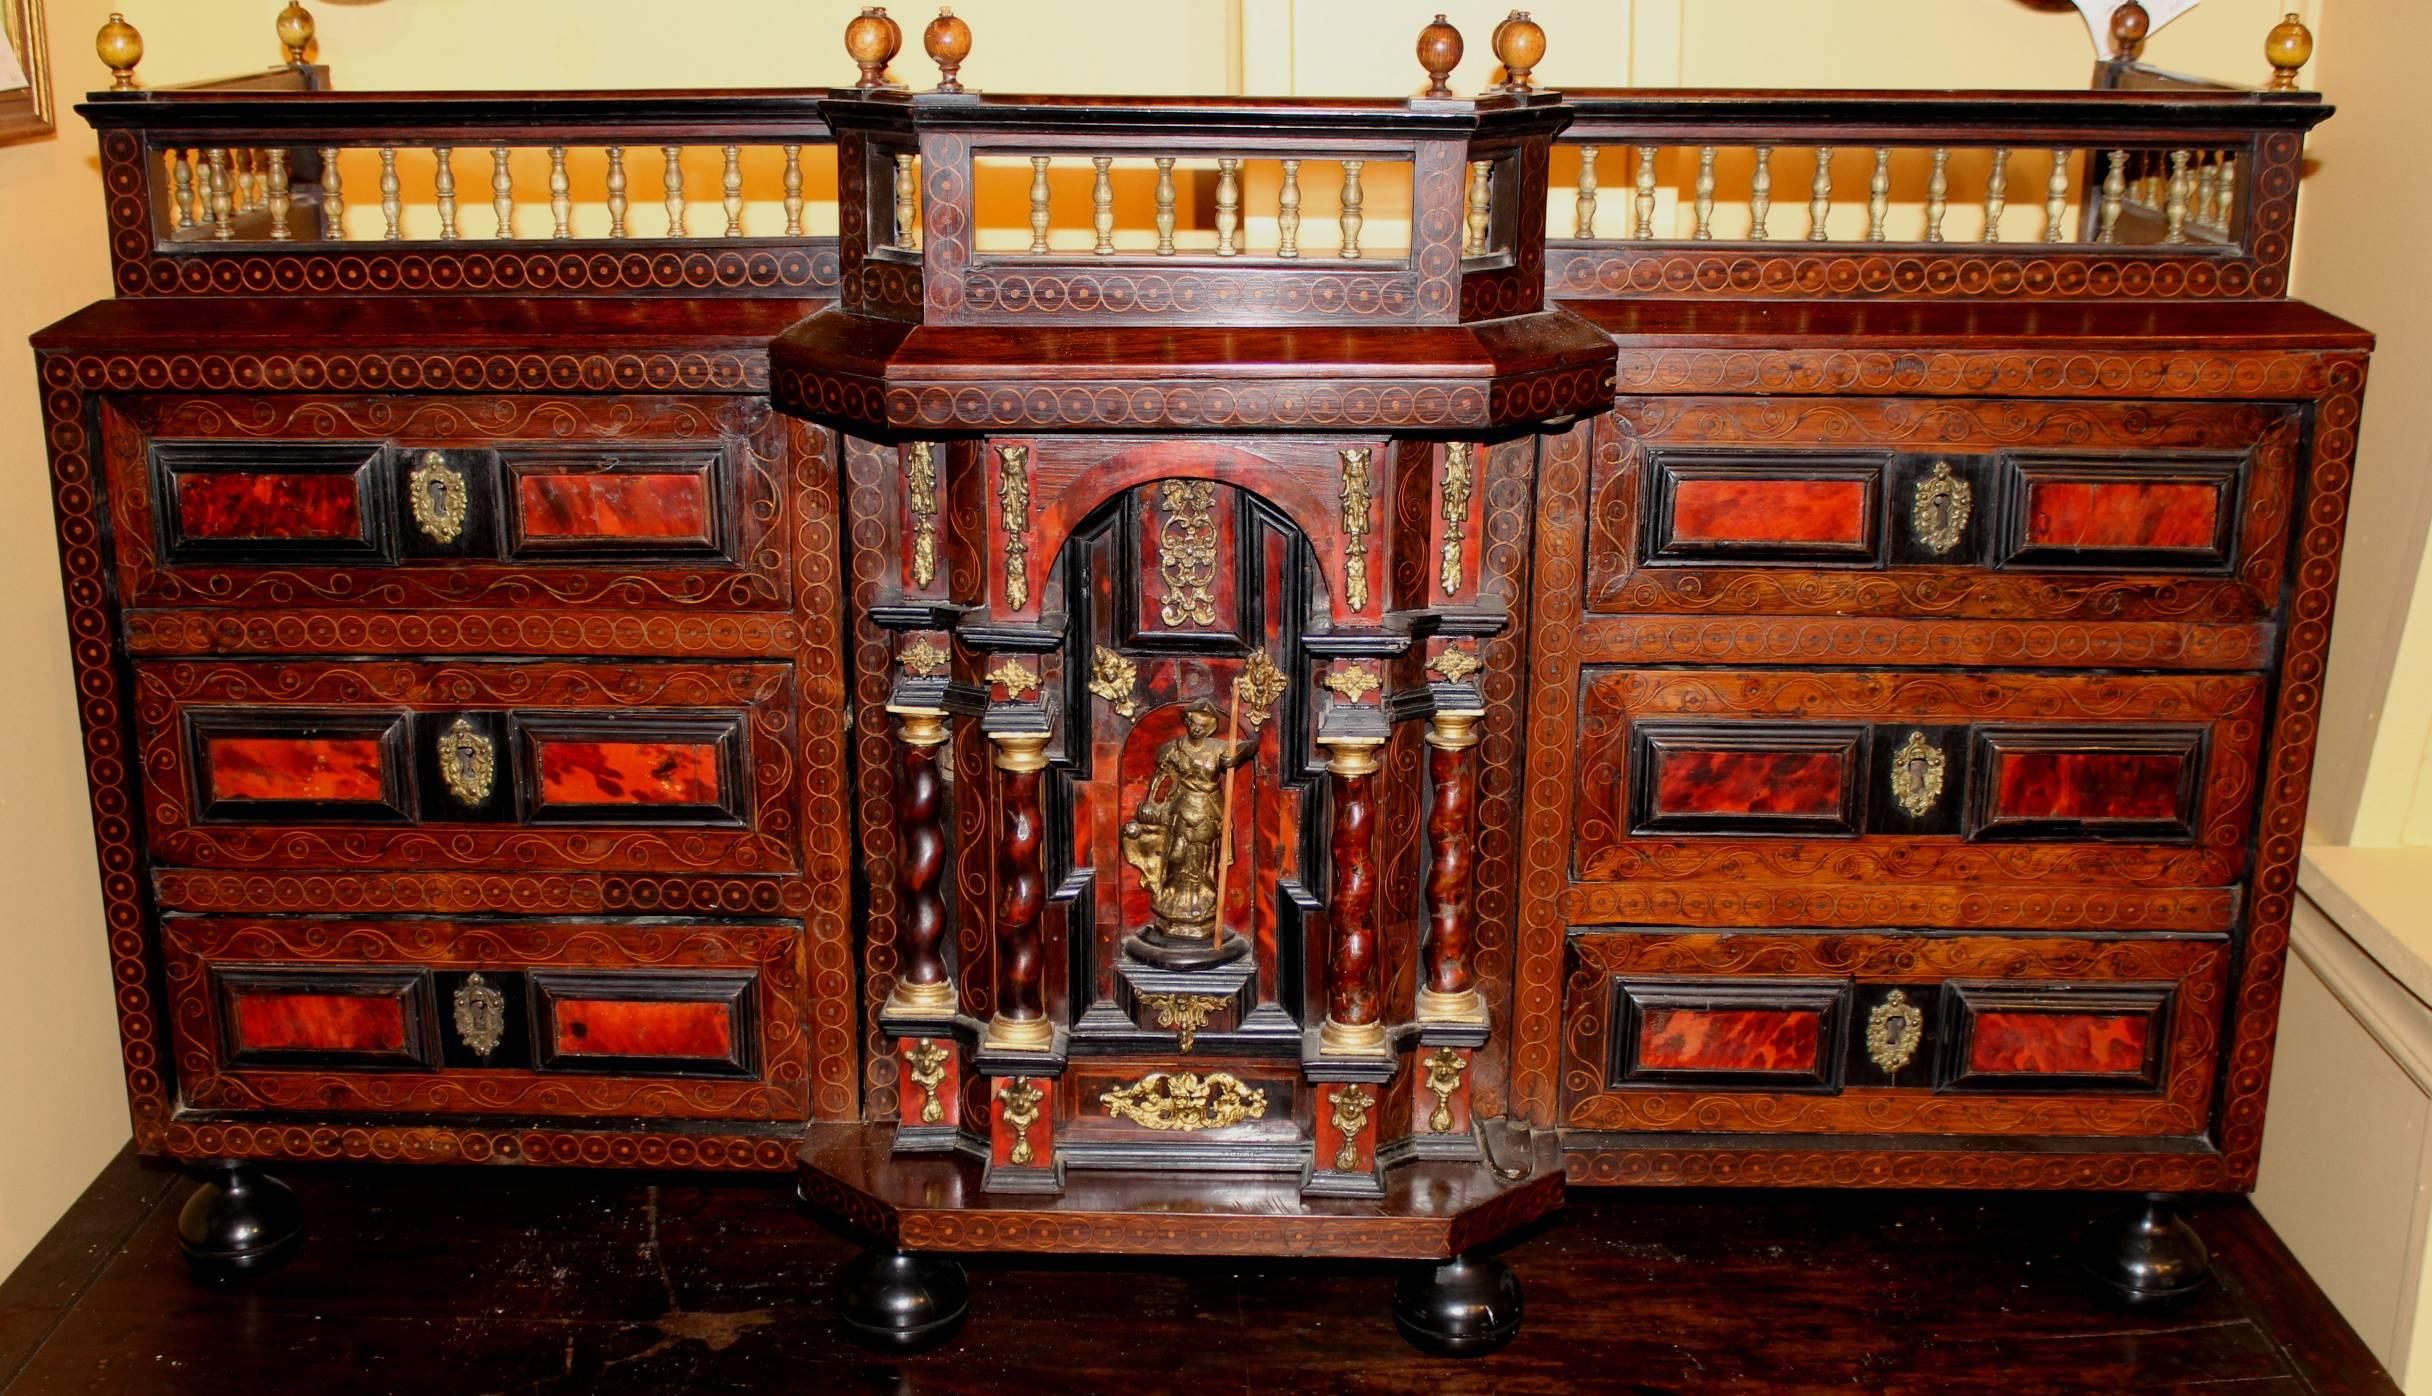 A beautiful Flemish ebonized walnut and rosewood table cabinet with satinwood inlay, ormolu decoration, and carved gallery. The center door of the cabinet is decorated with carved twist columns and a classical figure, flanked by three drawers on